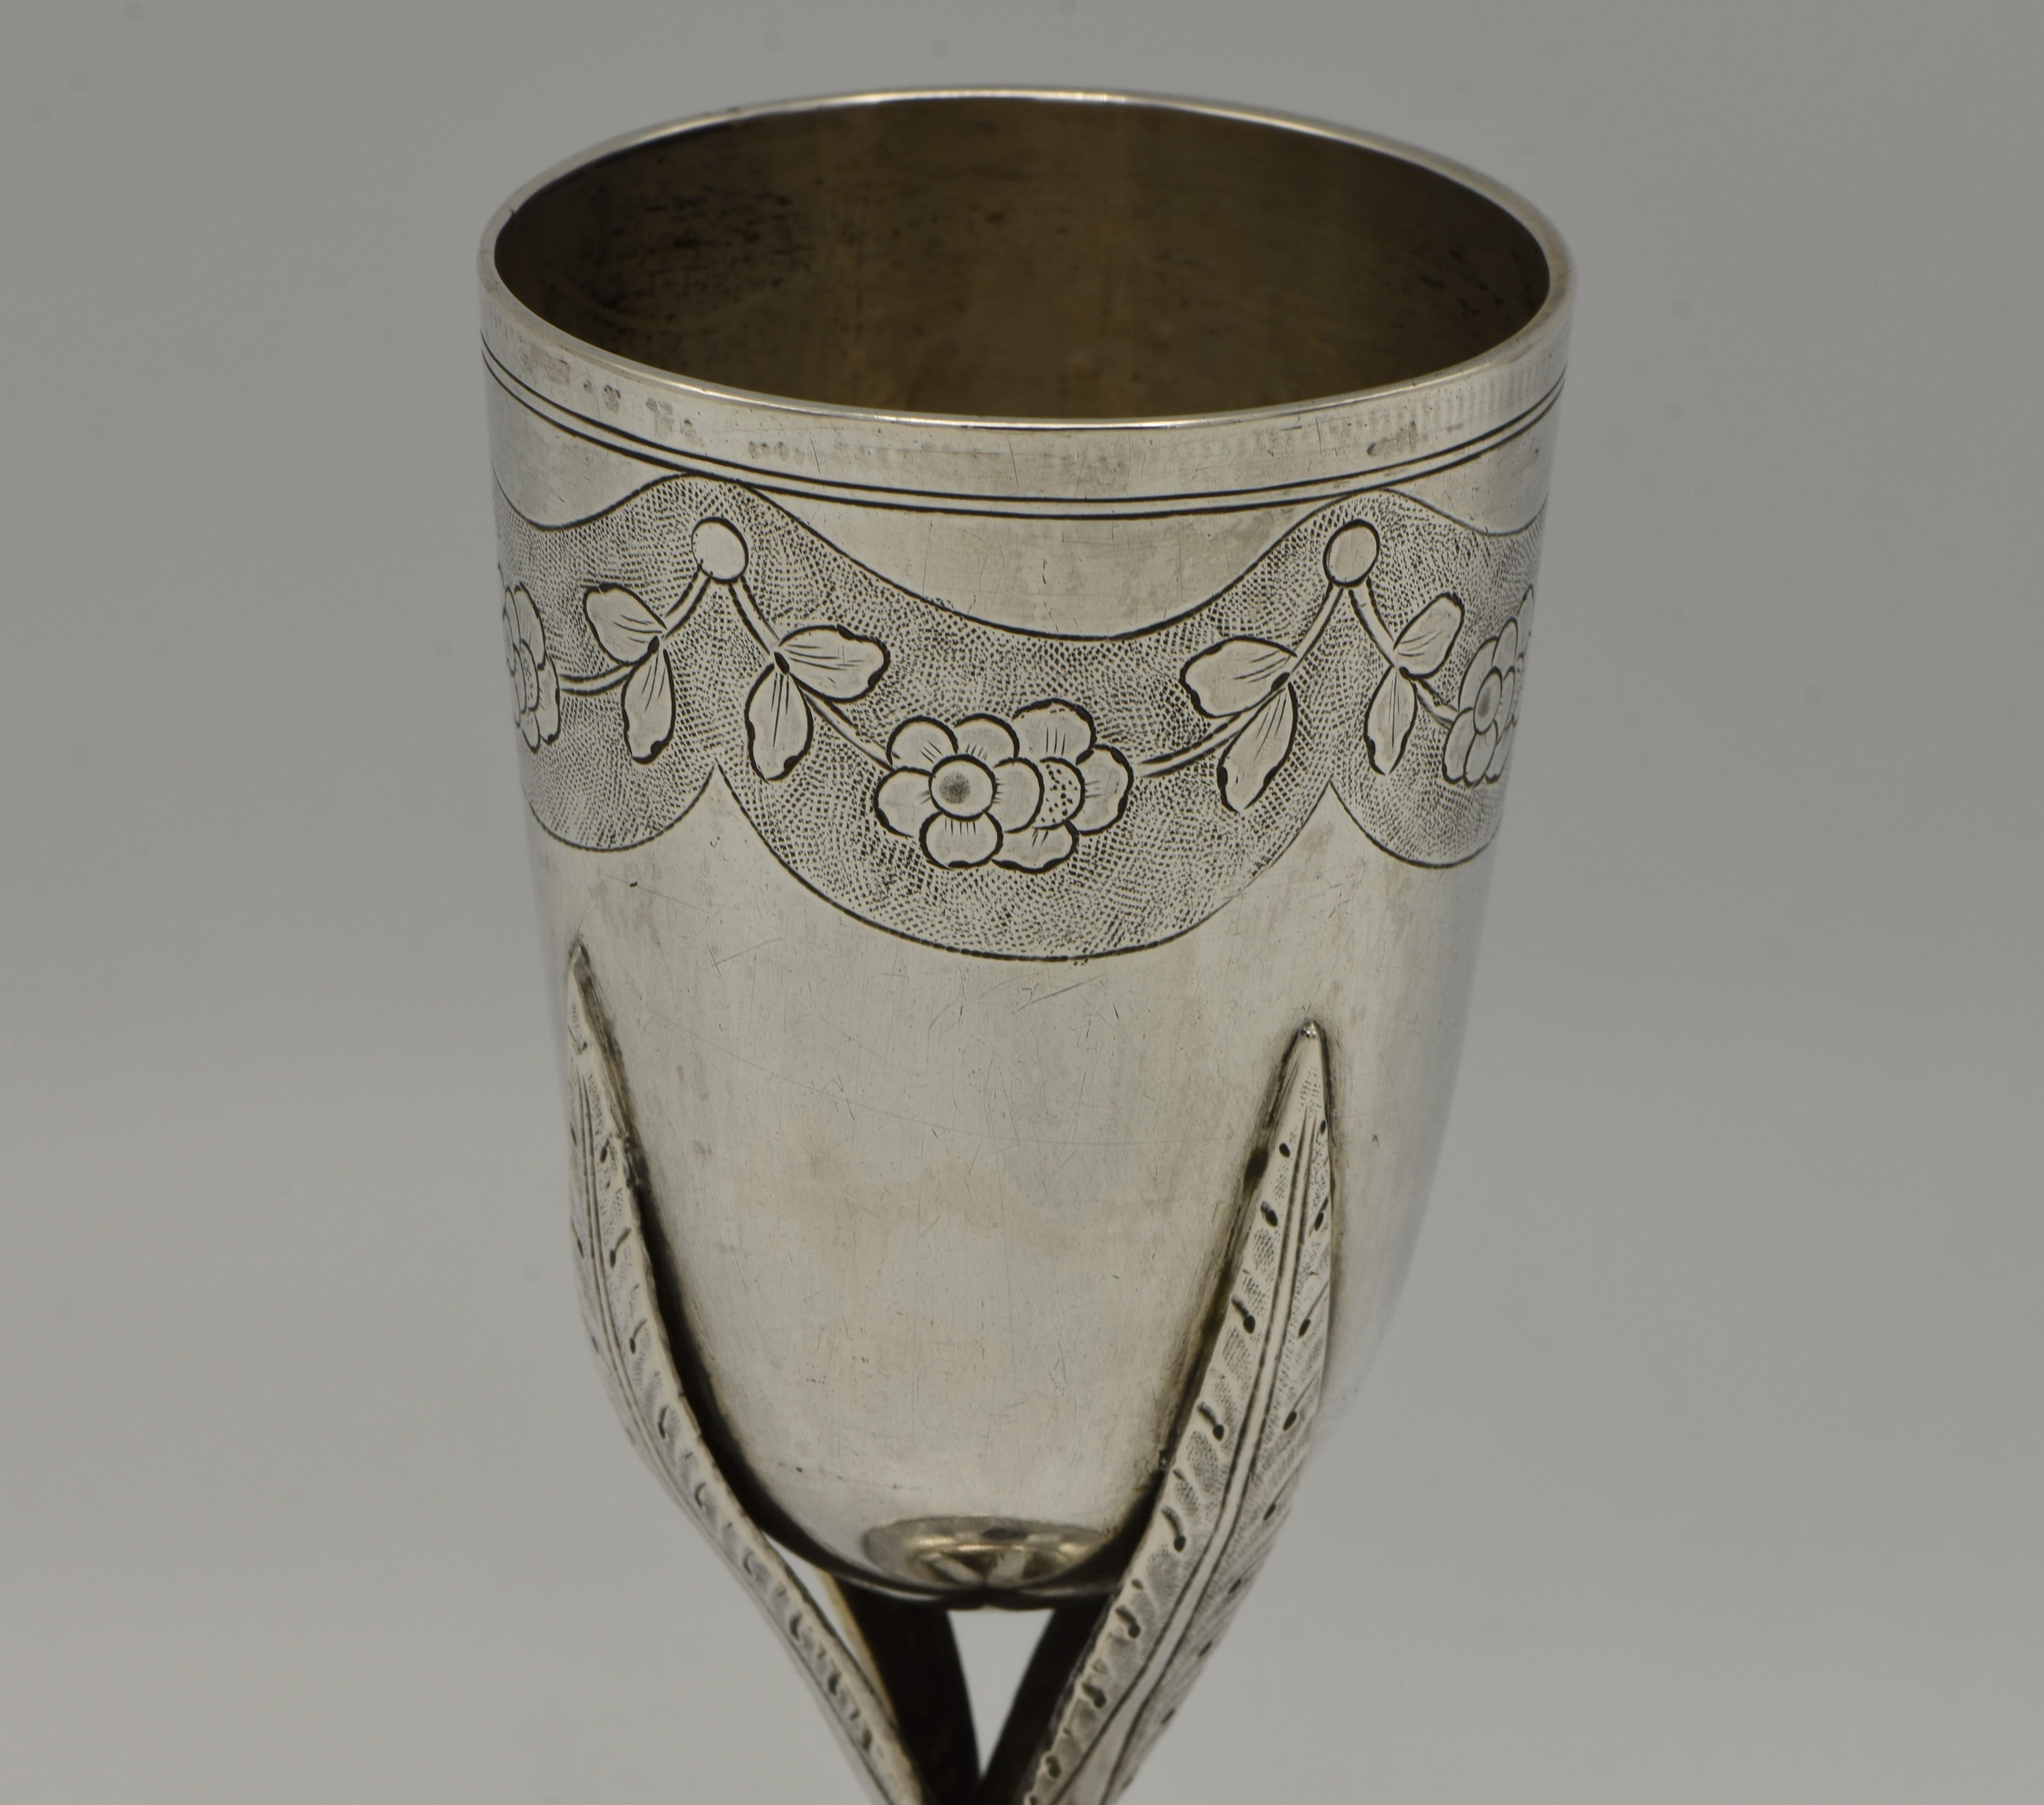 Handmade silver Kiddush goblet, Lemberg, Habsburg Empire, 1814
On square flowers-decorated base with three leaves shaped stem and engraved on the wine section with leaves and flowers.
Marked on the bottom with Lemberg silver hallmarks for